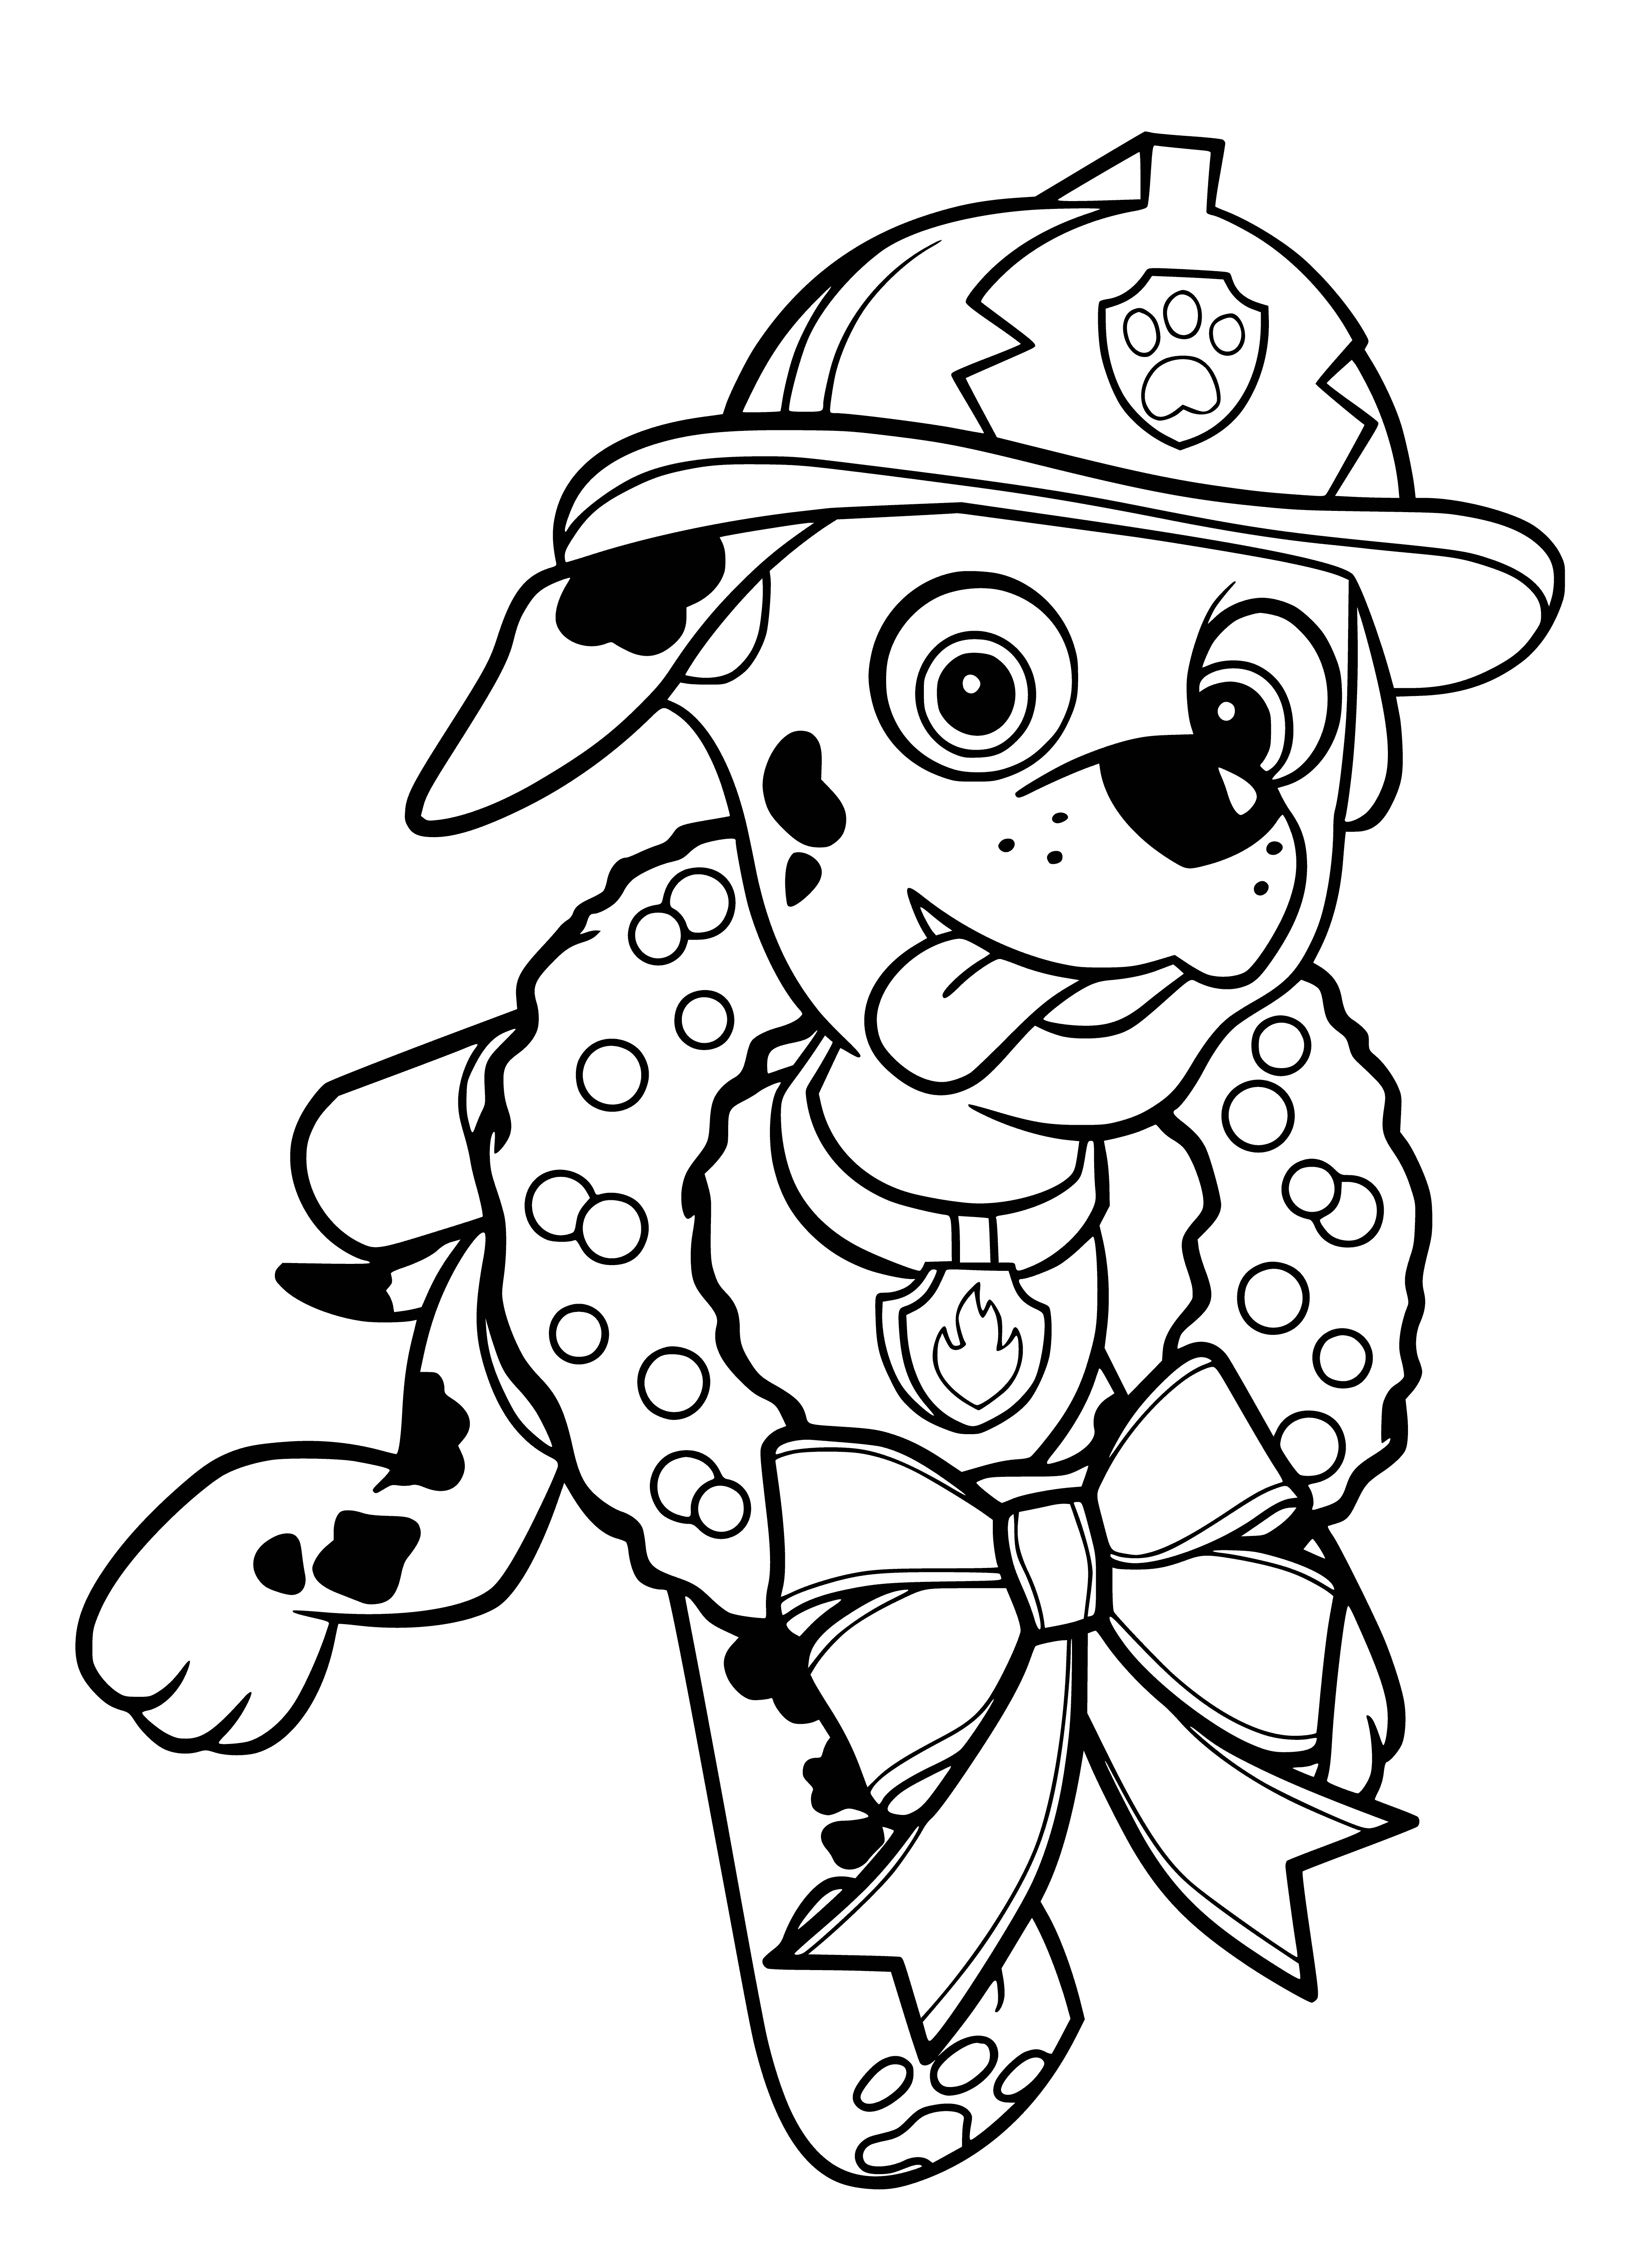 coloring page: Marshal is the leader of the PAW Patrol, rescuing animals with his trusty fire truck and firefighter hat.